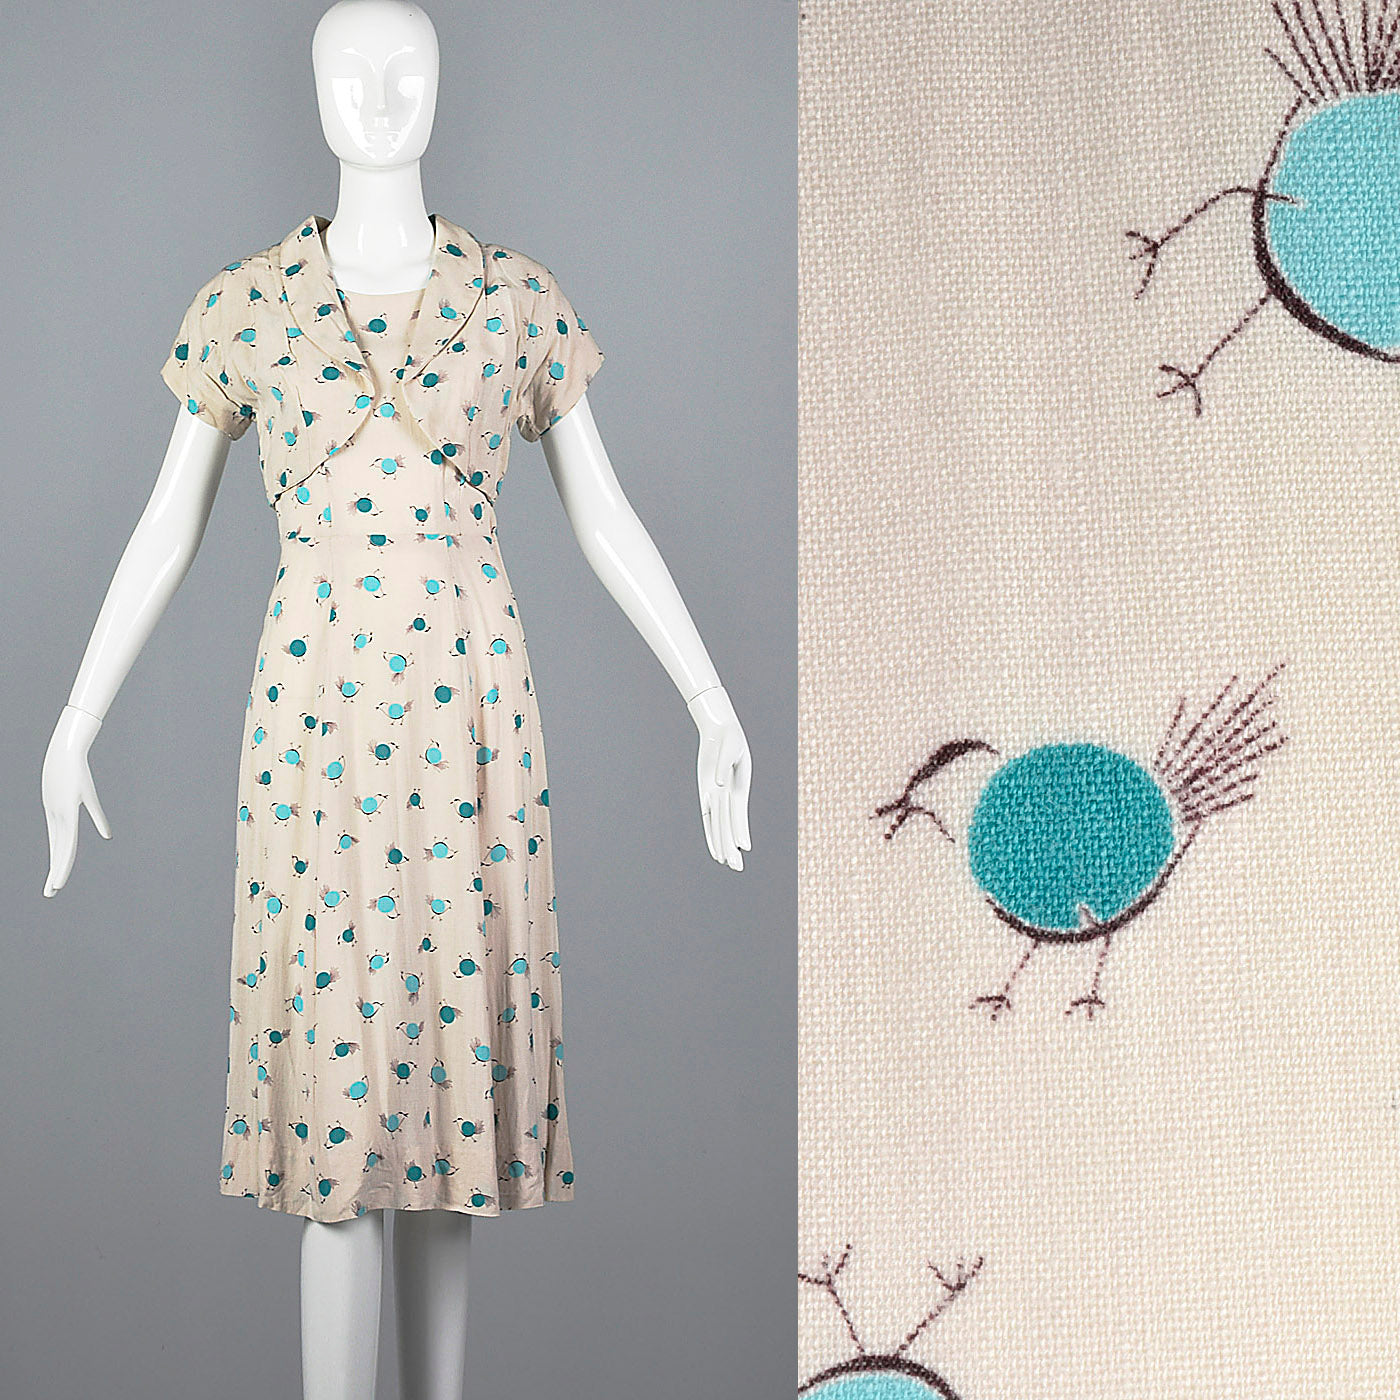 1950s Novelty Print Dress with Abstract Blue Birds